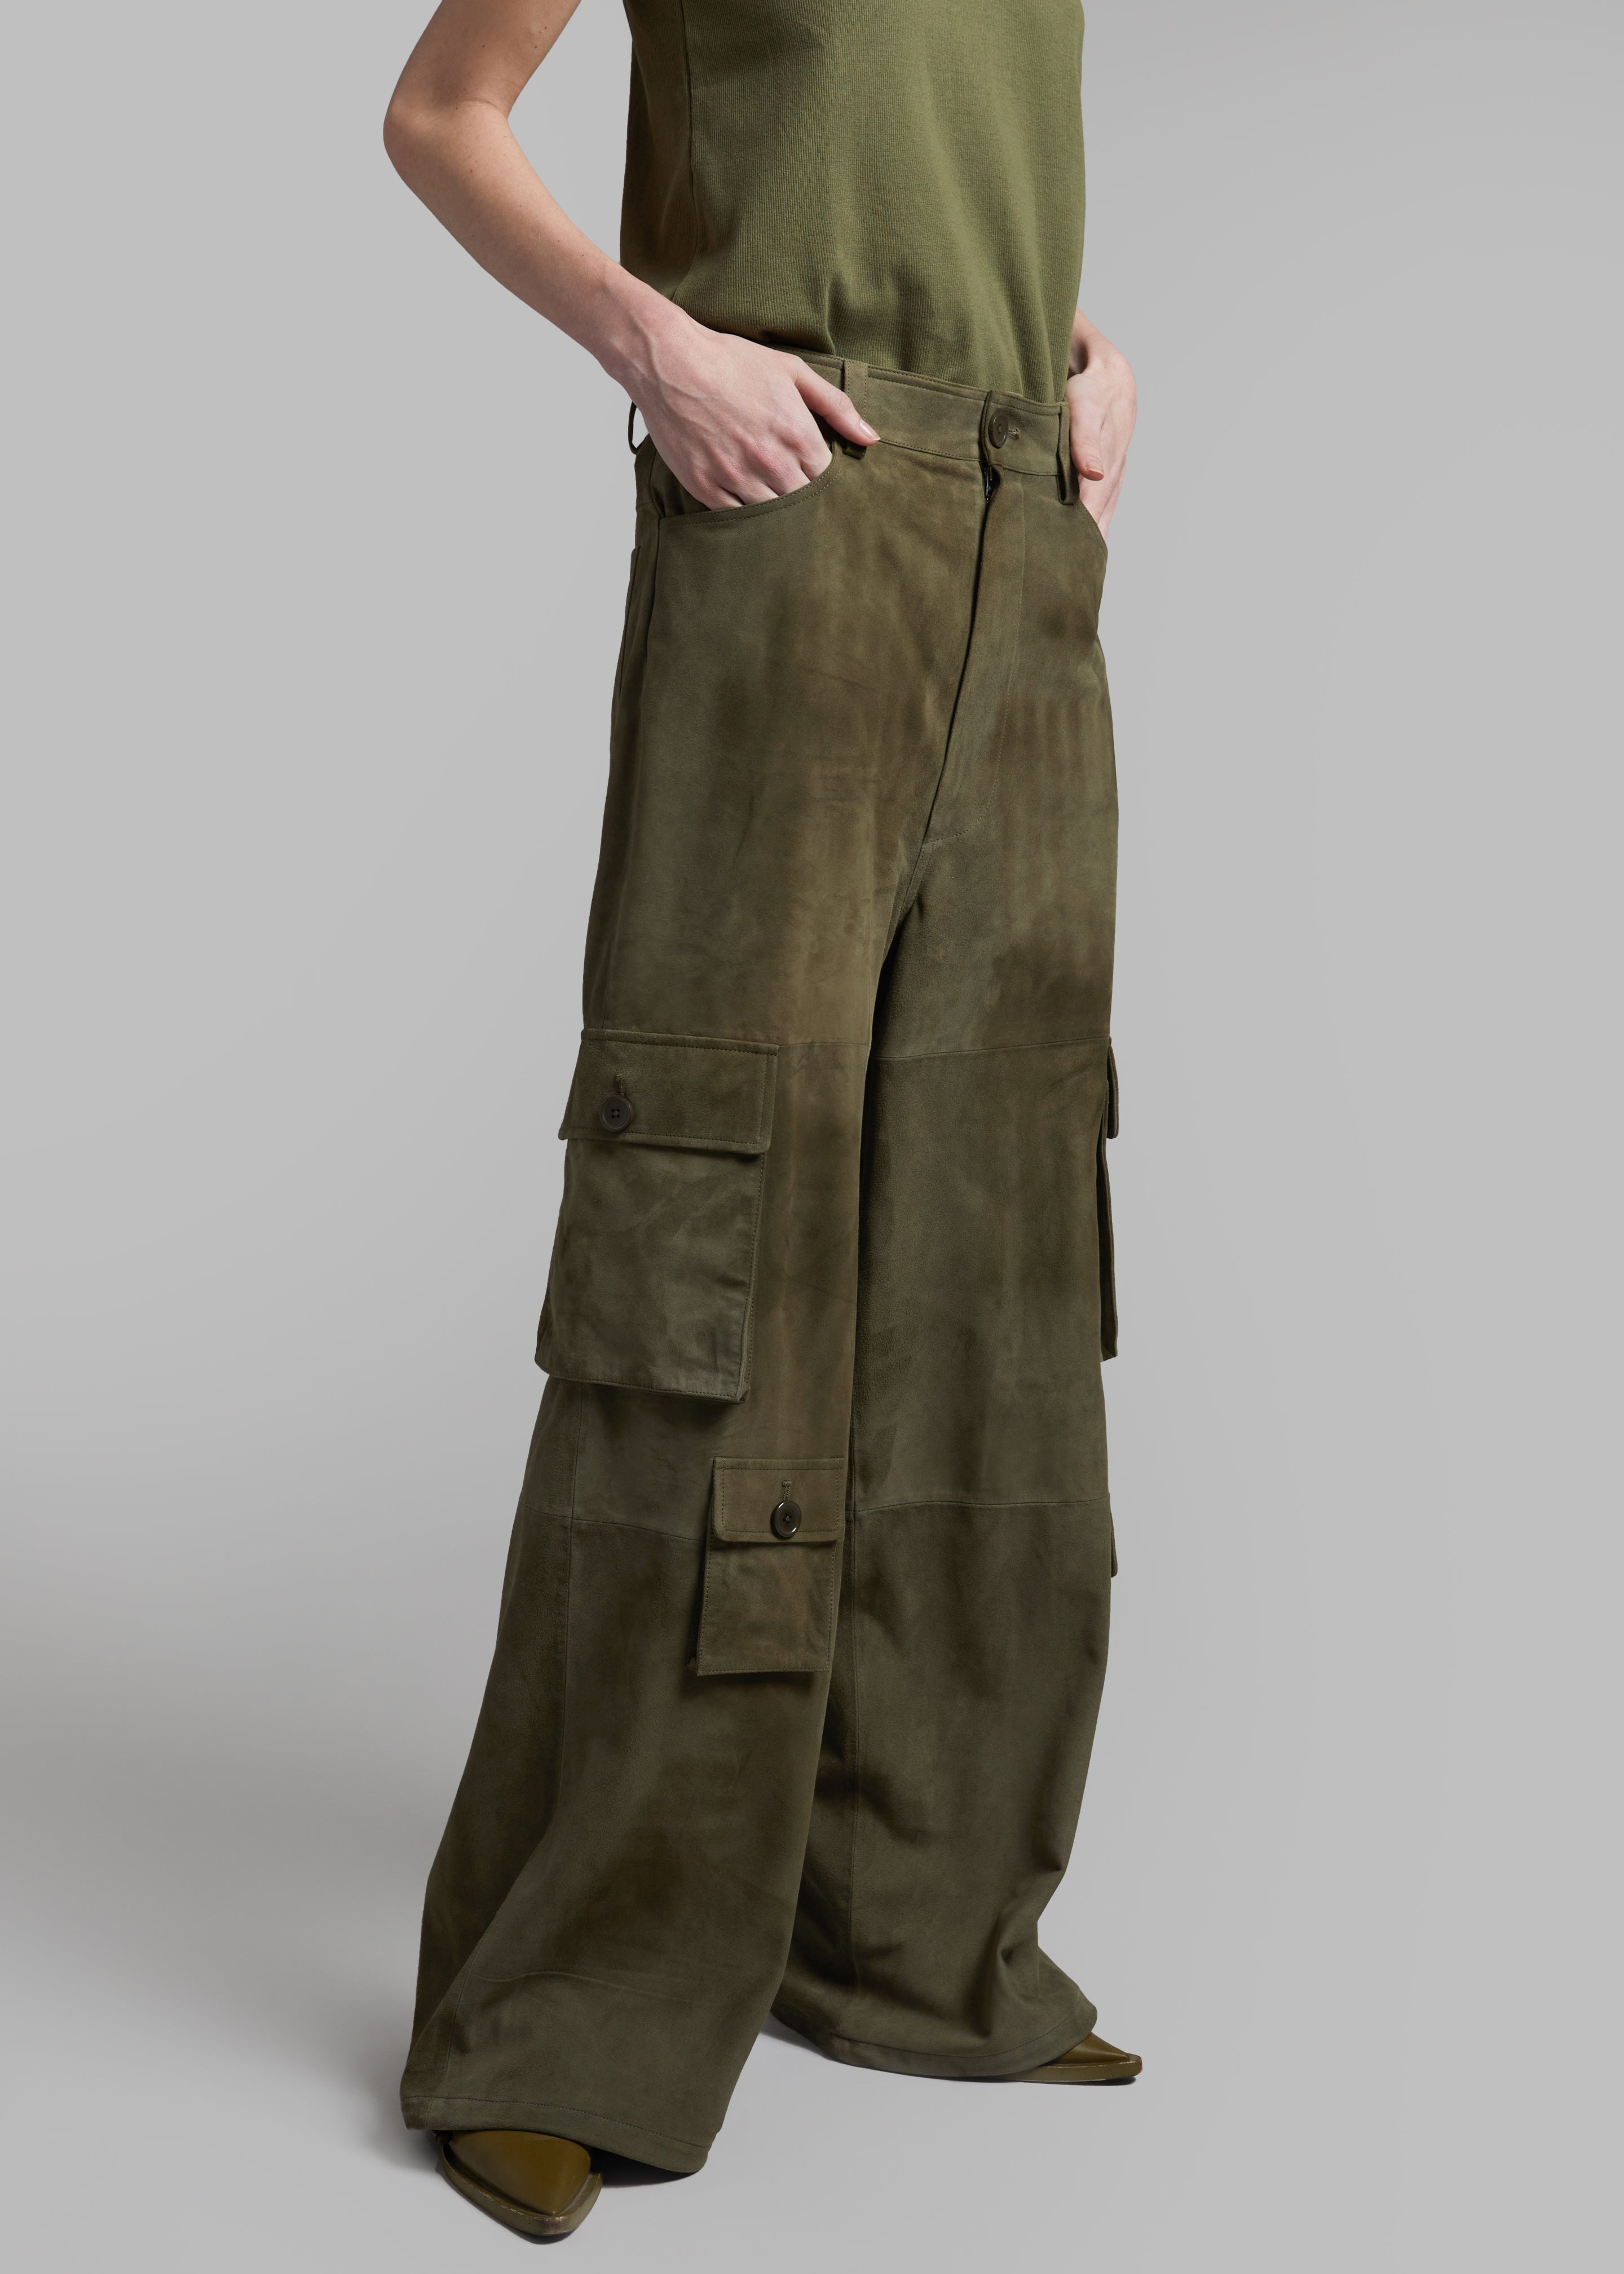 Hailey Suede Oversized Cargo Pants - Olive - 5